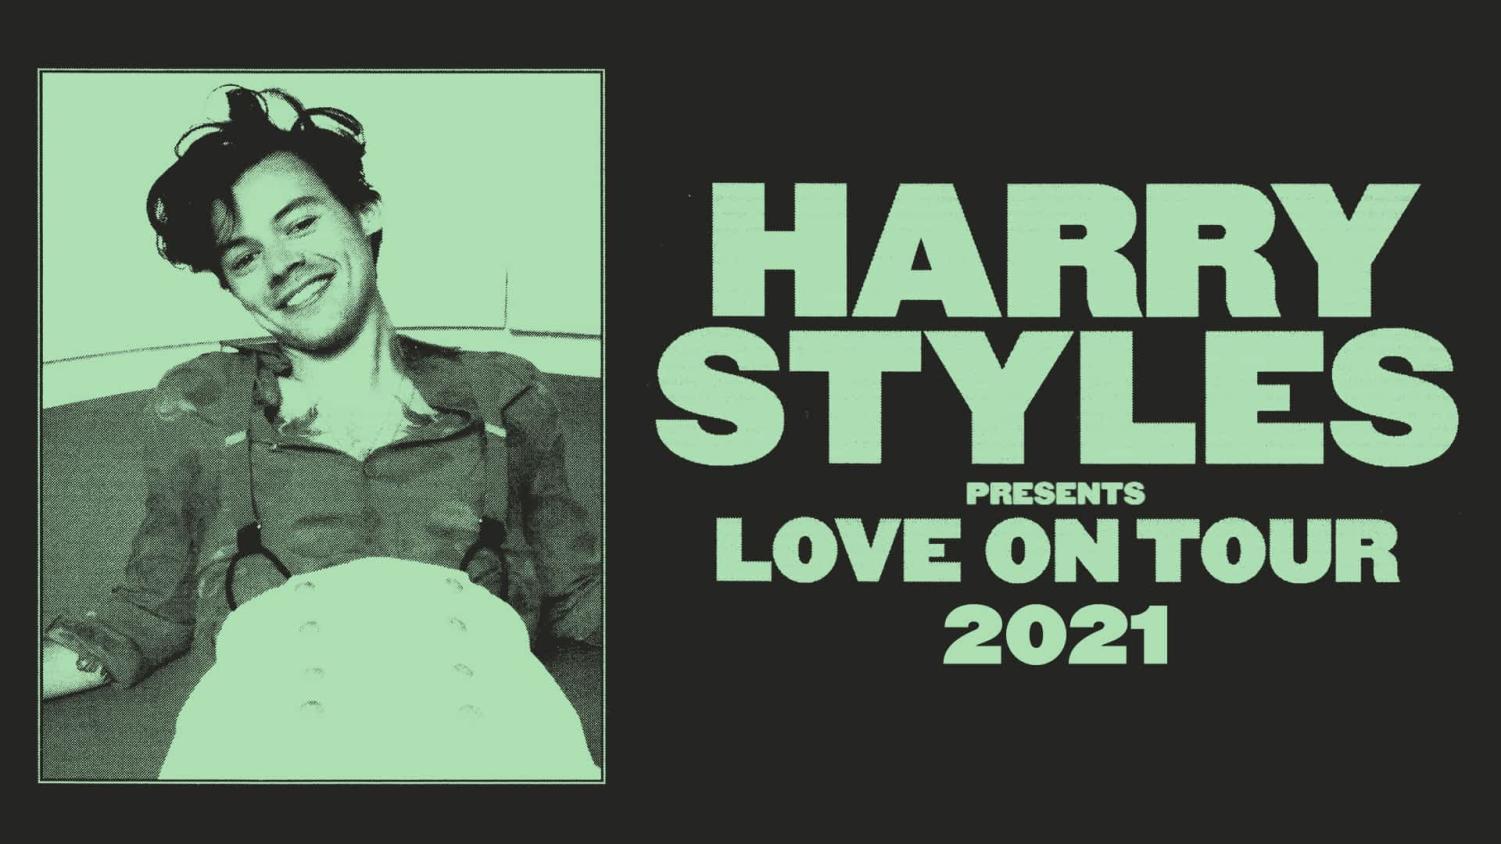 HARRY STYLES LOVE ON TOUR  Harry styles clothes, Harry styles